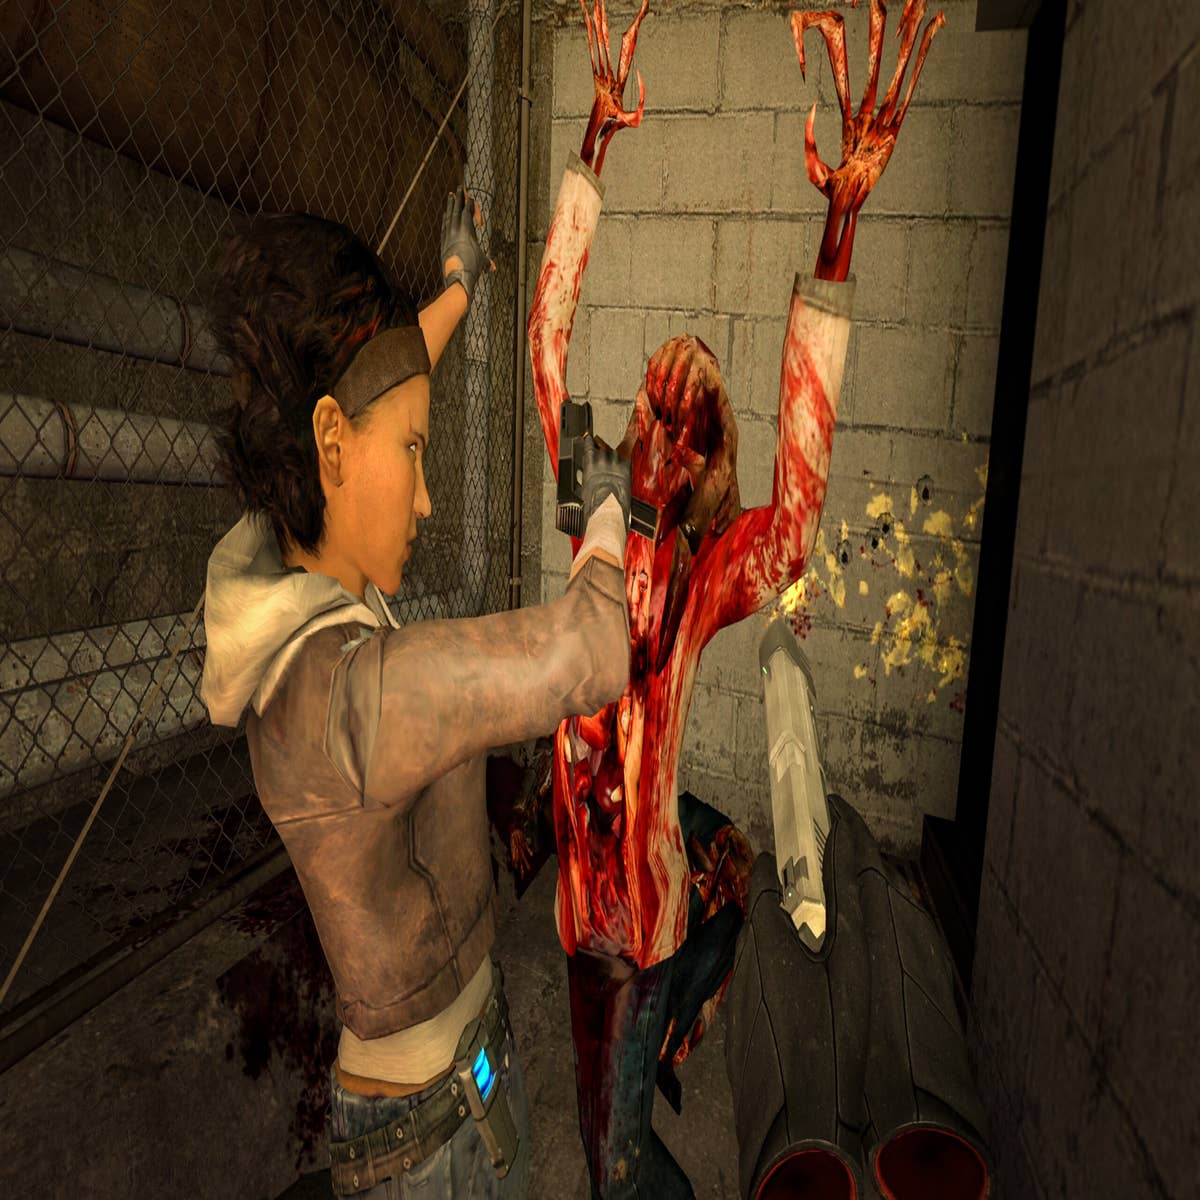 Half-Life: Alyx Mod Lets You Play Without VR But At A Virtual Cost